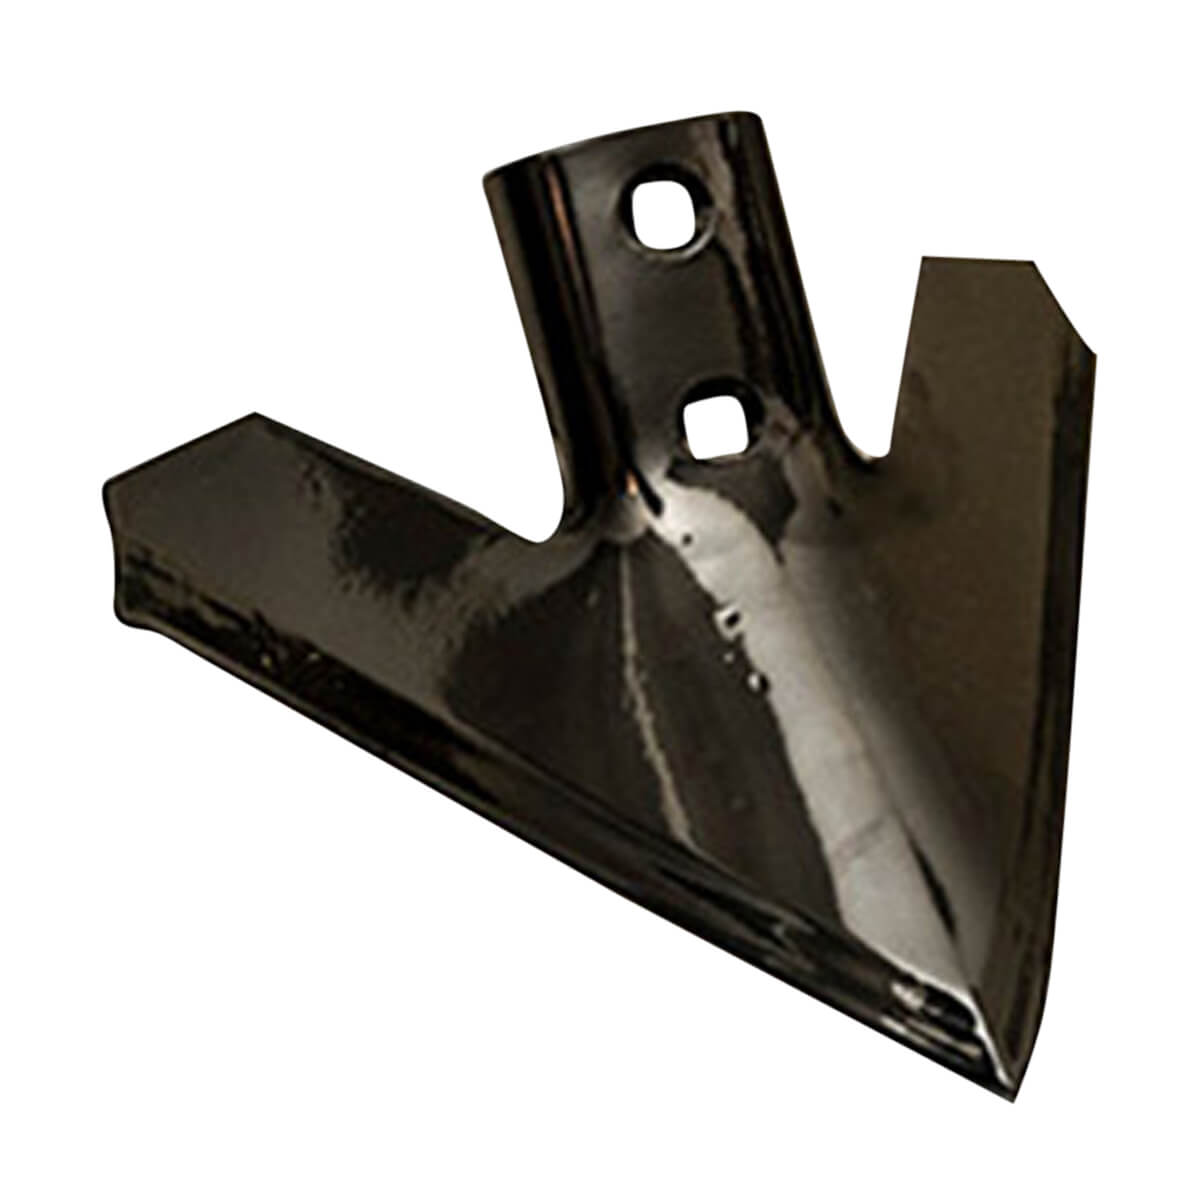 1/4" x 11" 47° Field Cultivator Sweep (Bolt-On)